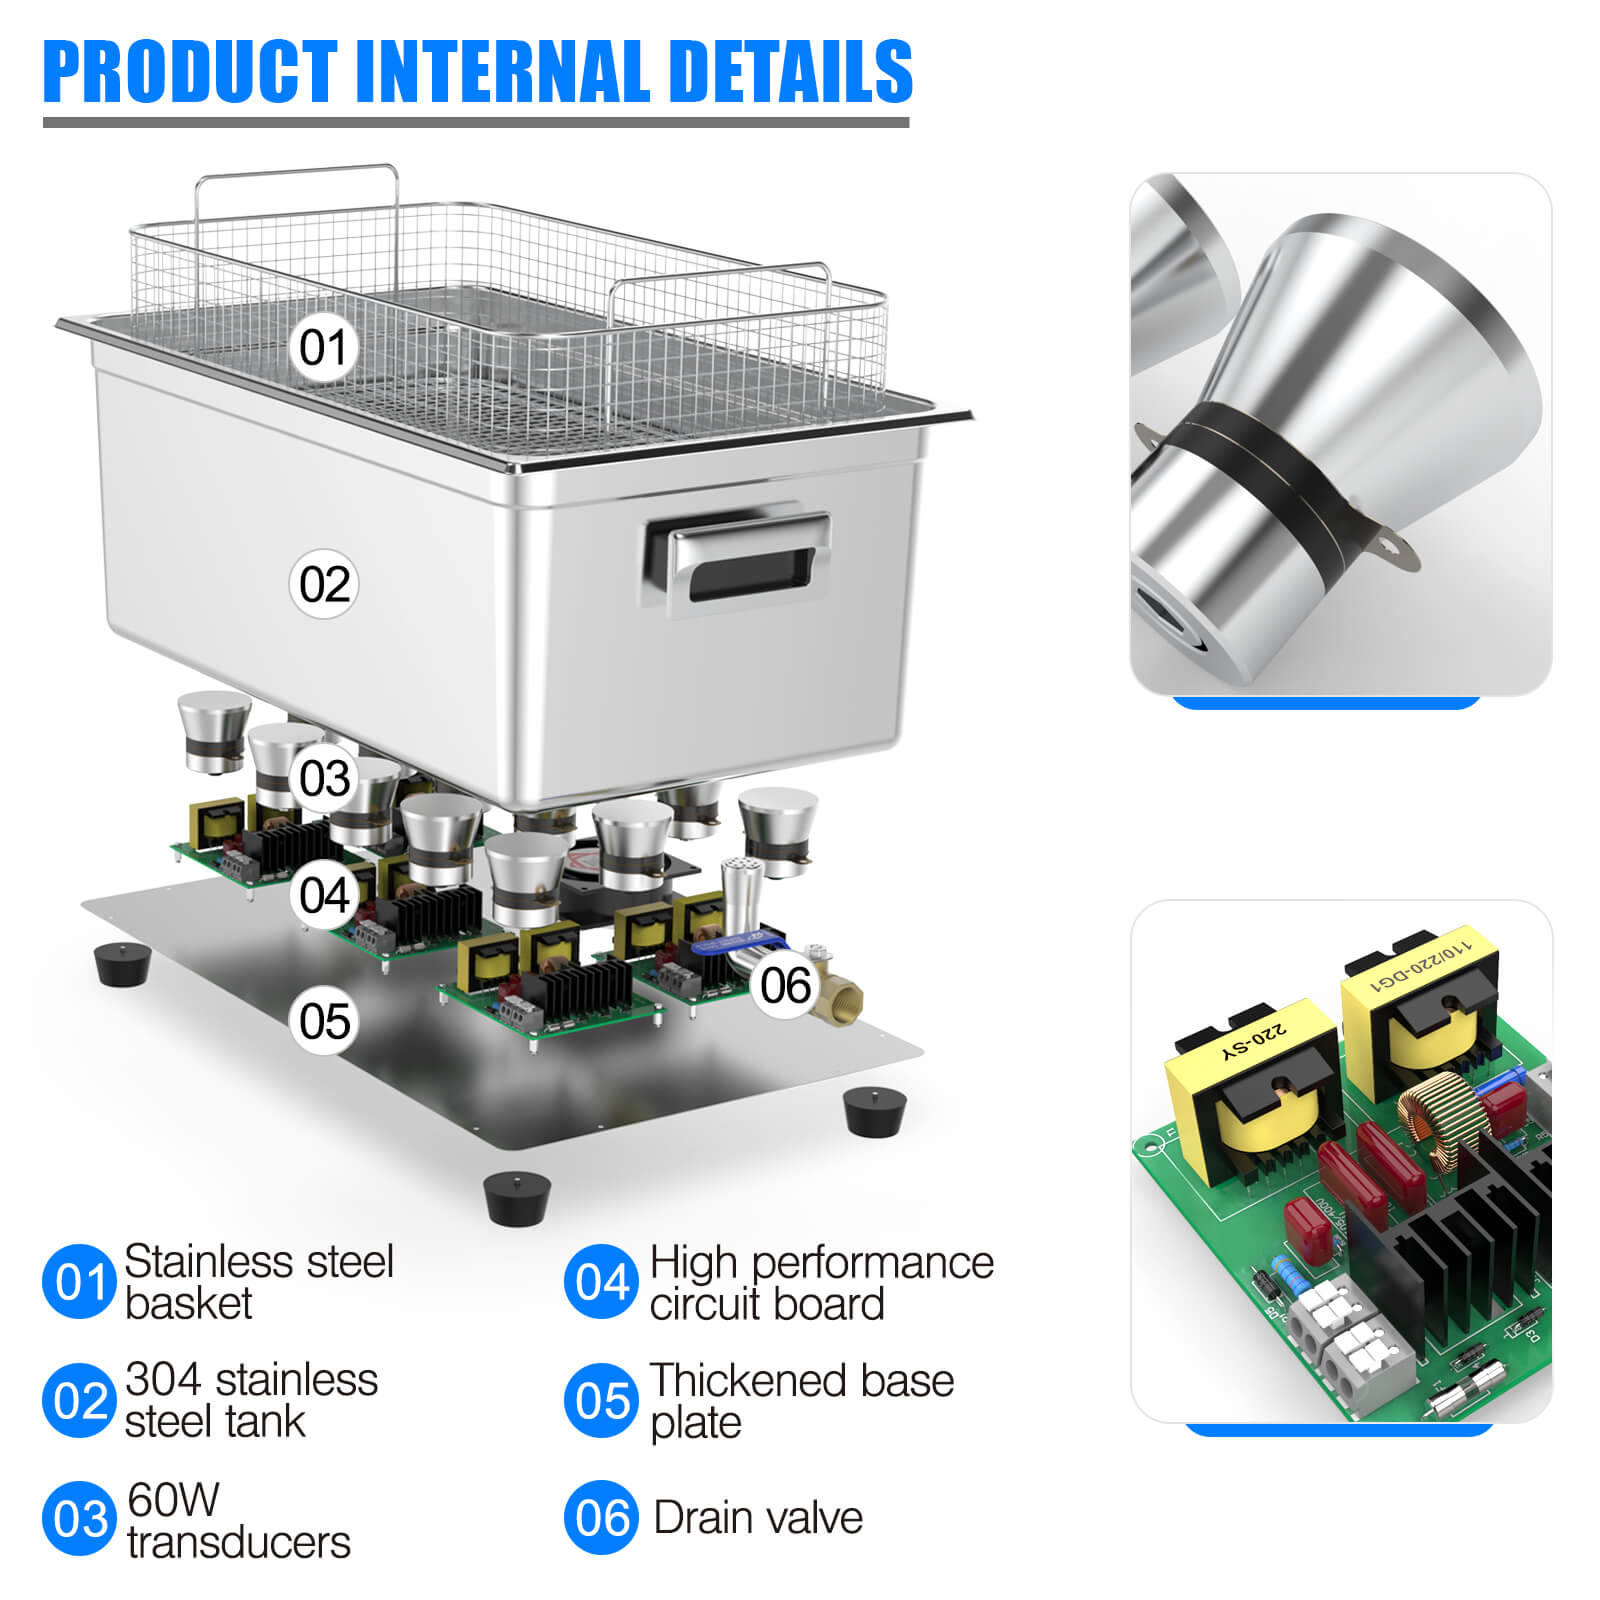 Dental ultrasonic cleaning machine can be used for denture and instrument cleaning